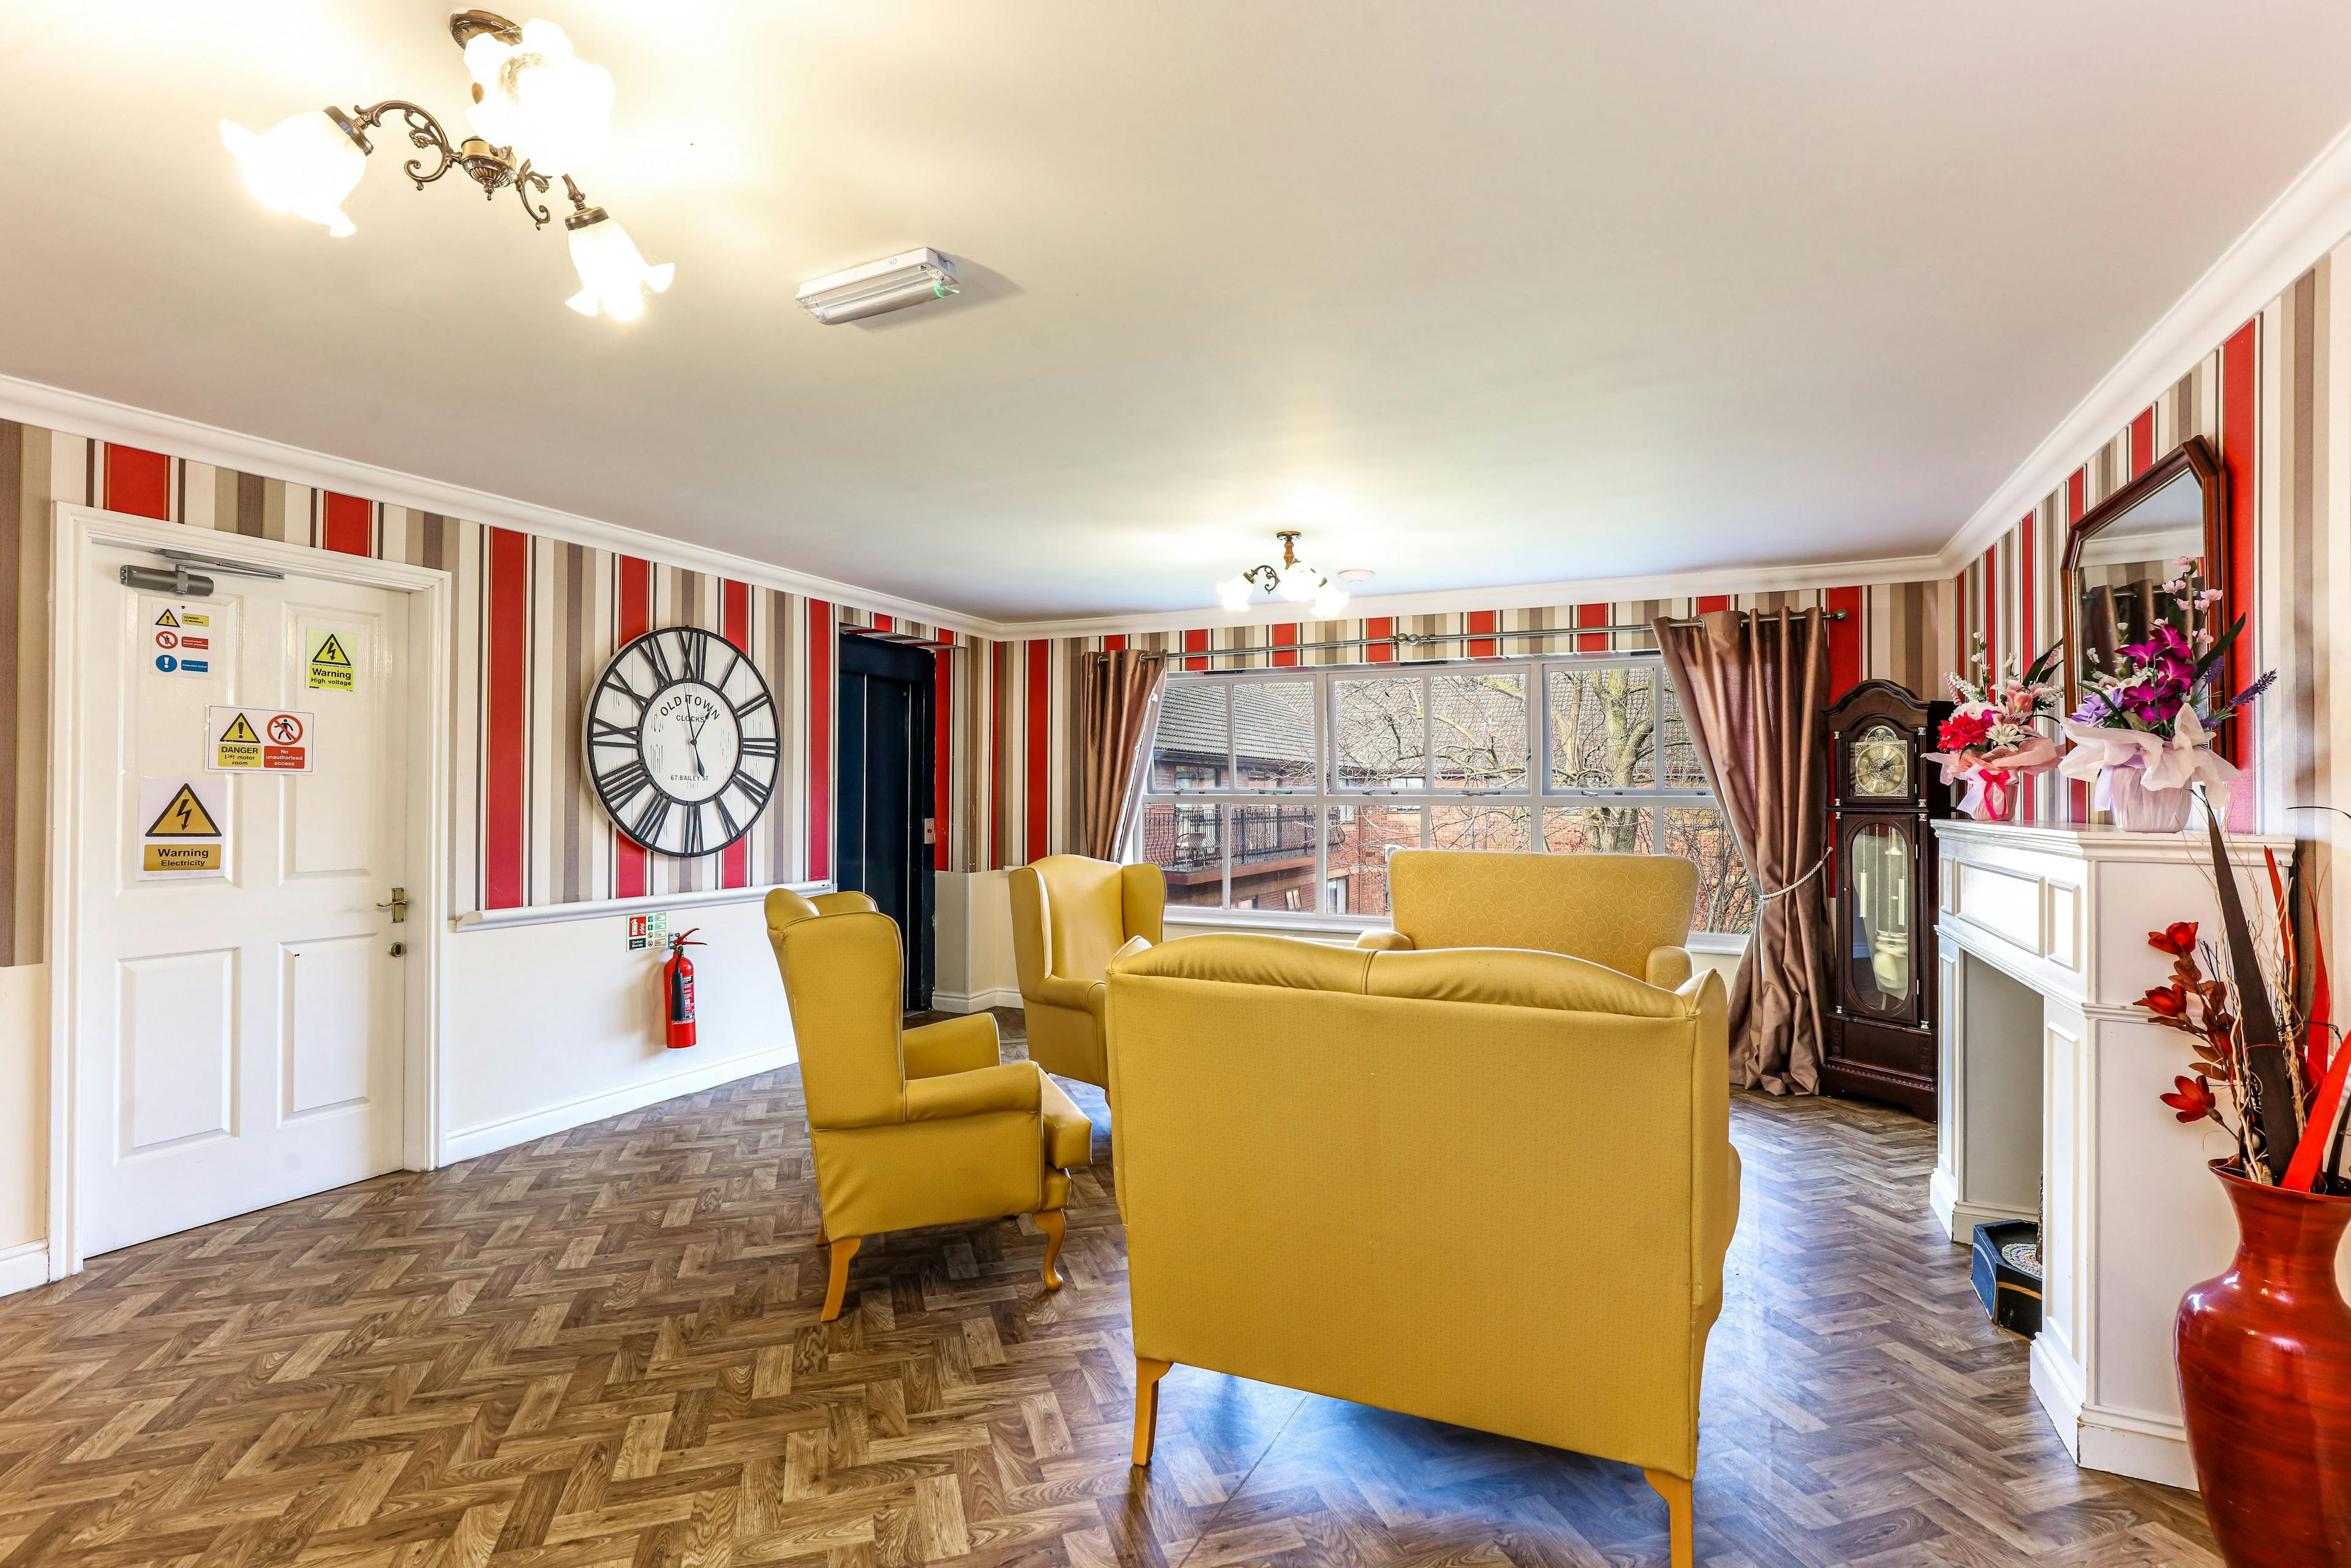 Minster Care Group - Grays Court care home 8